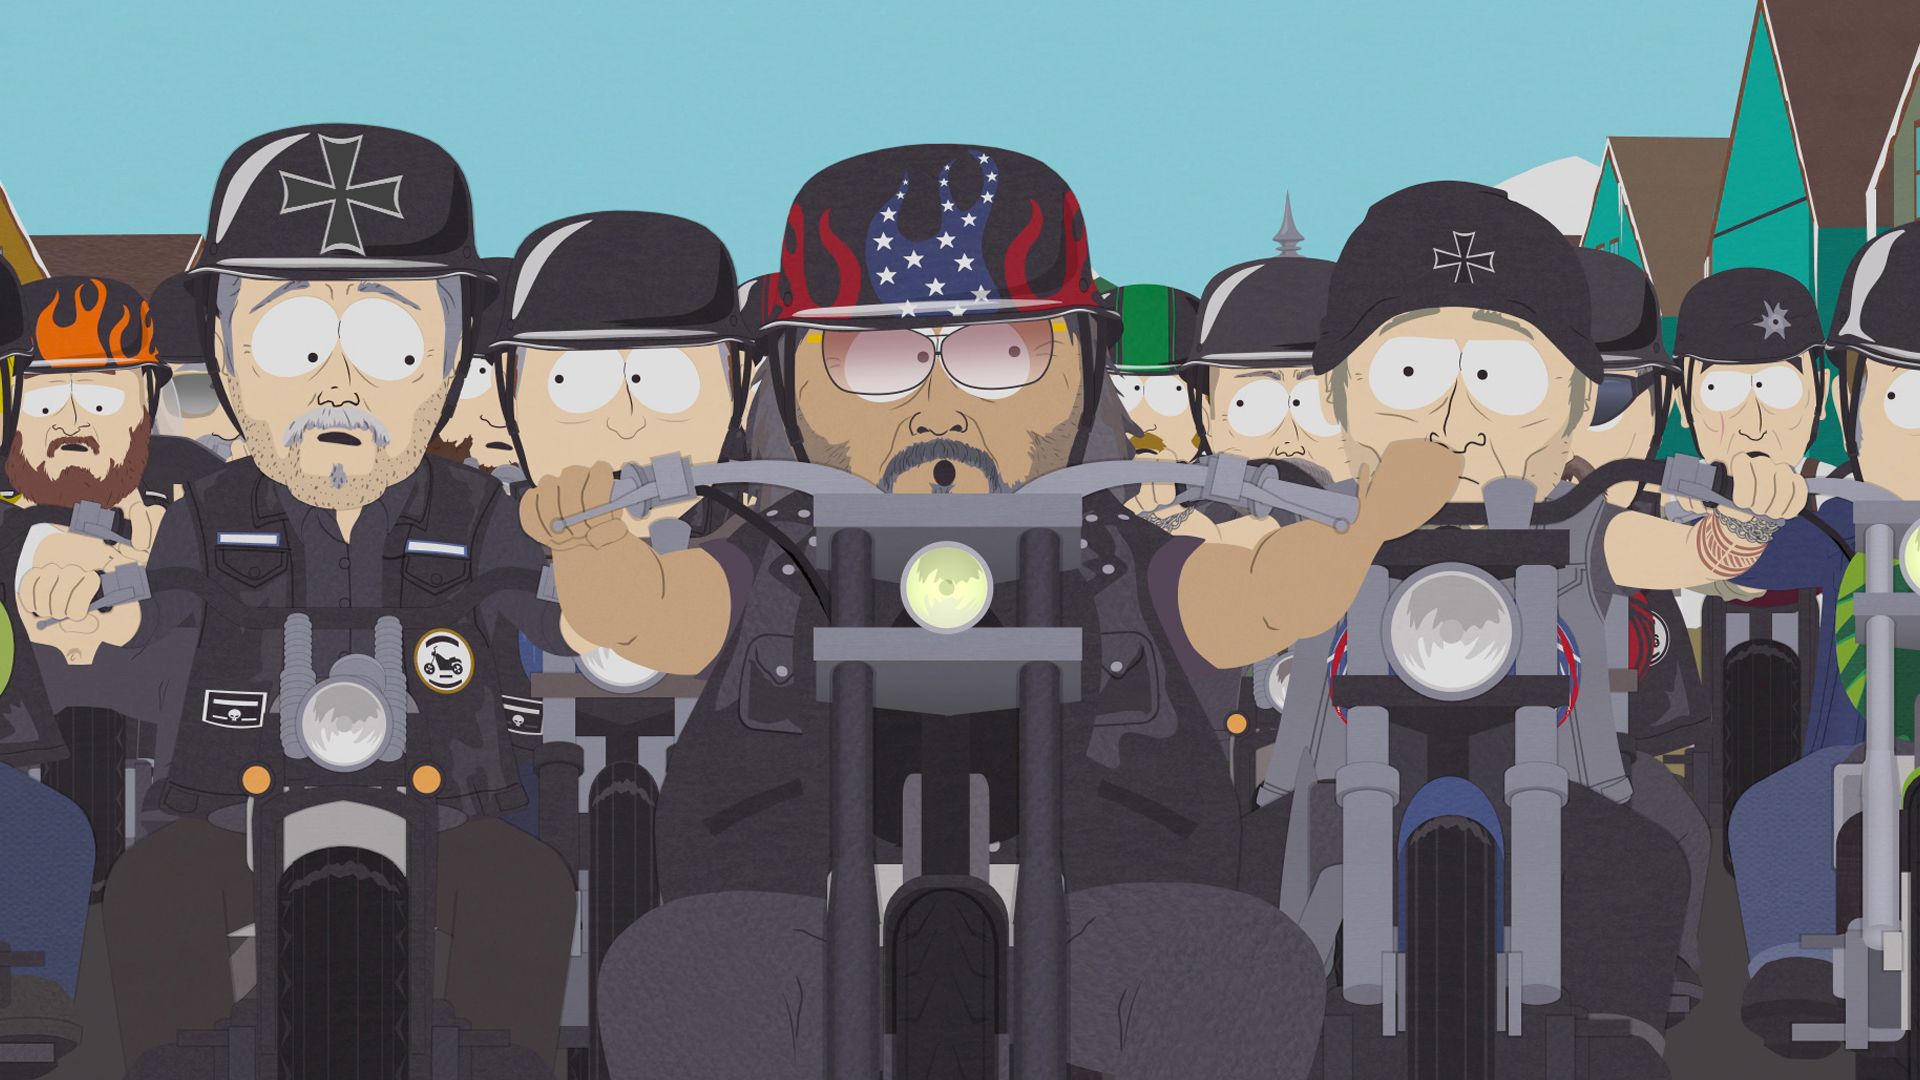 We're Turning Some Heads! - Seizoen 13 Aflevering 12 - South Park